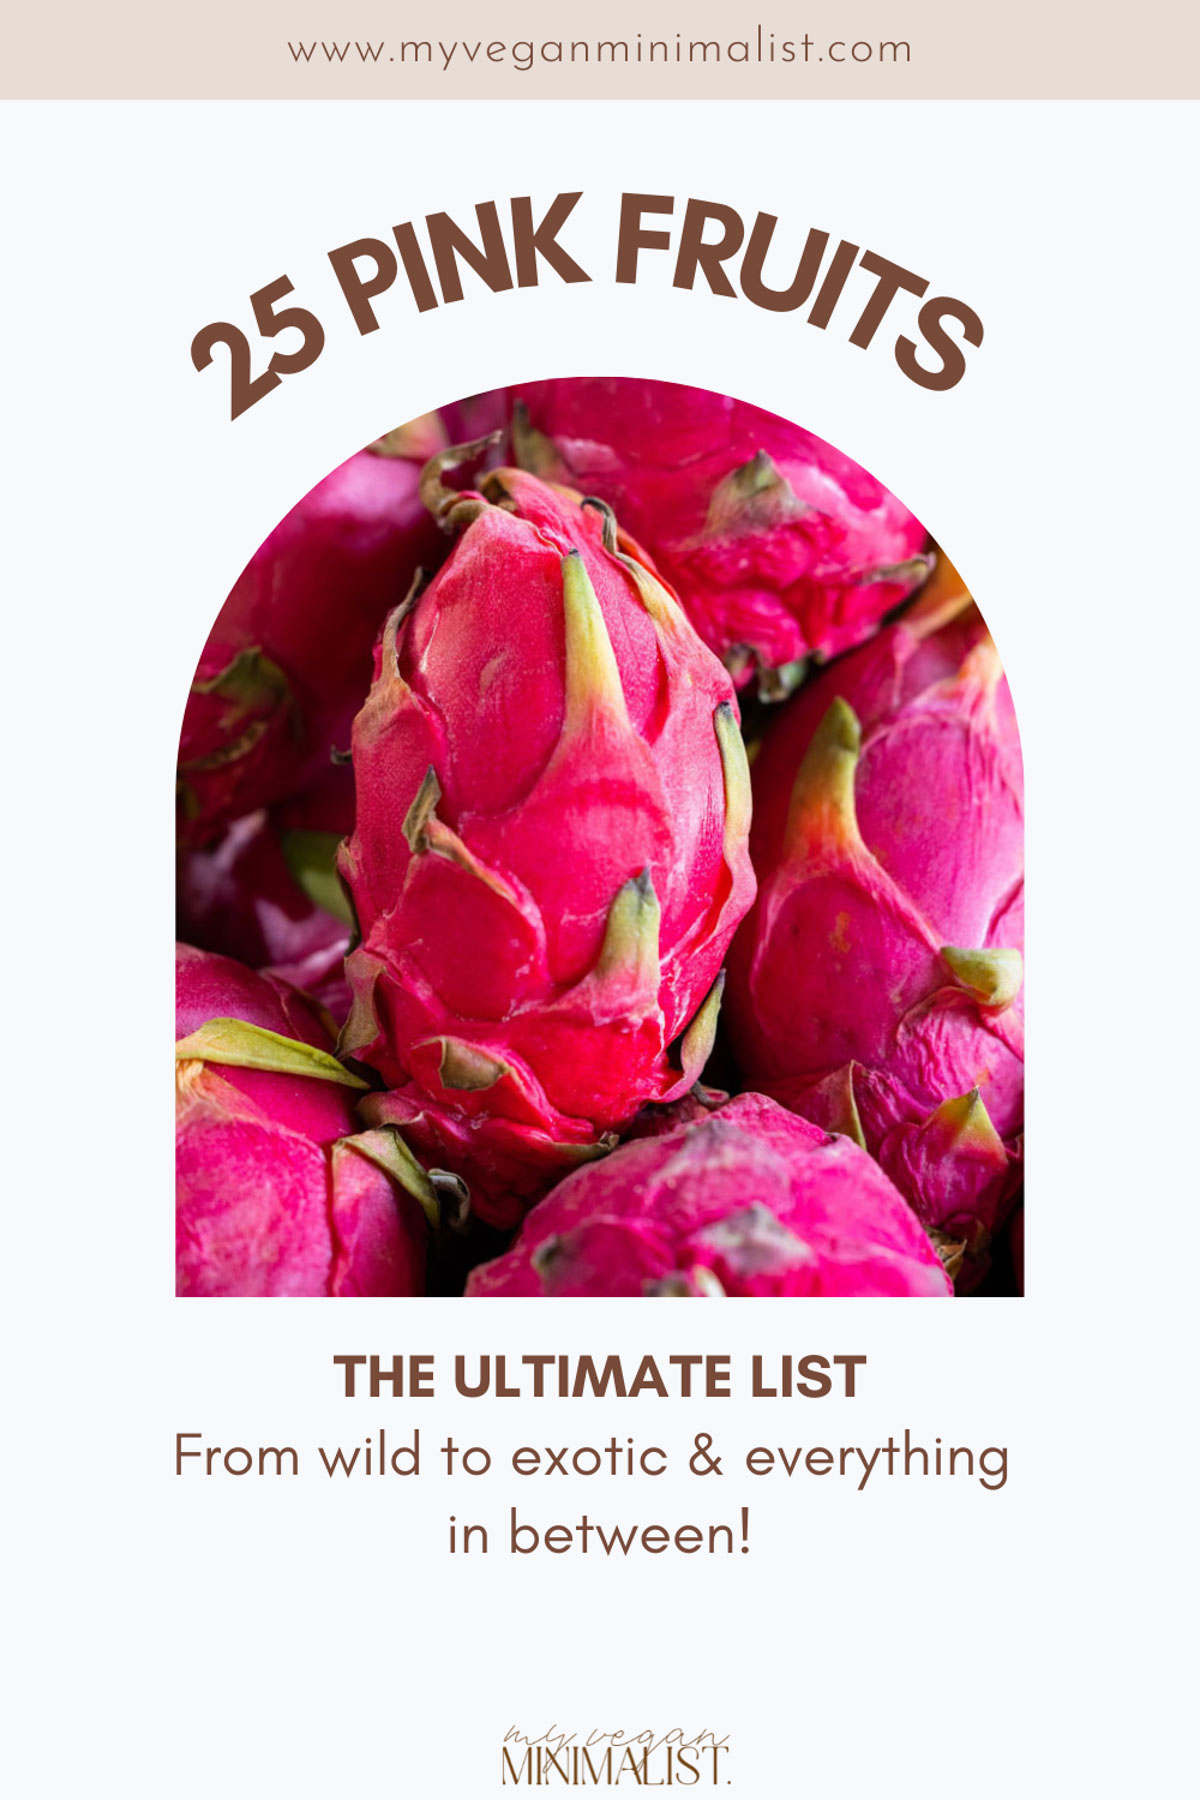 A graphic showing dragon fruit in the middle with the text 25 Pink Fruits around it.